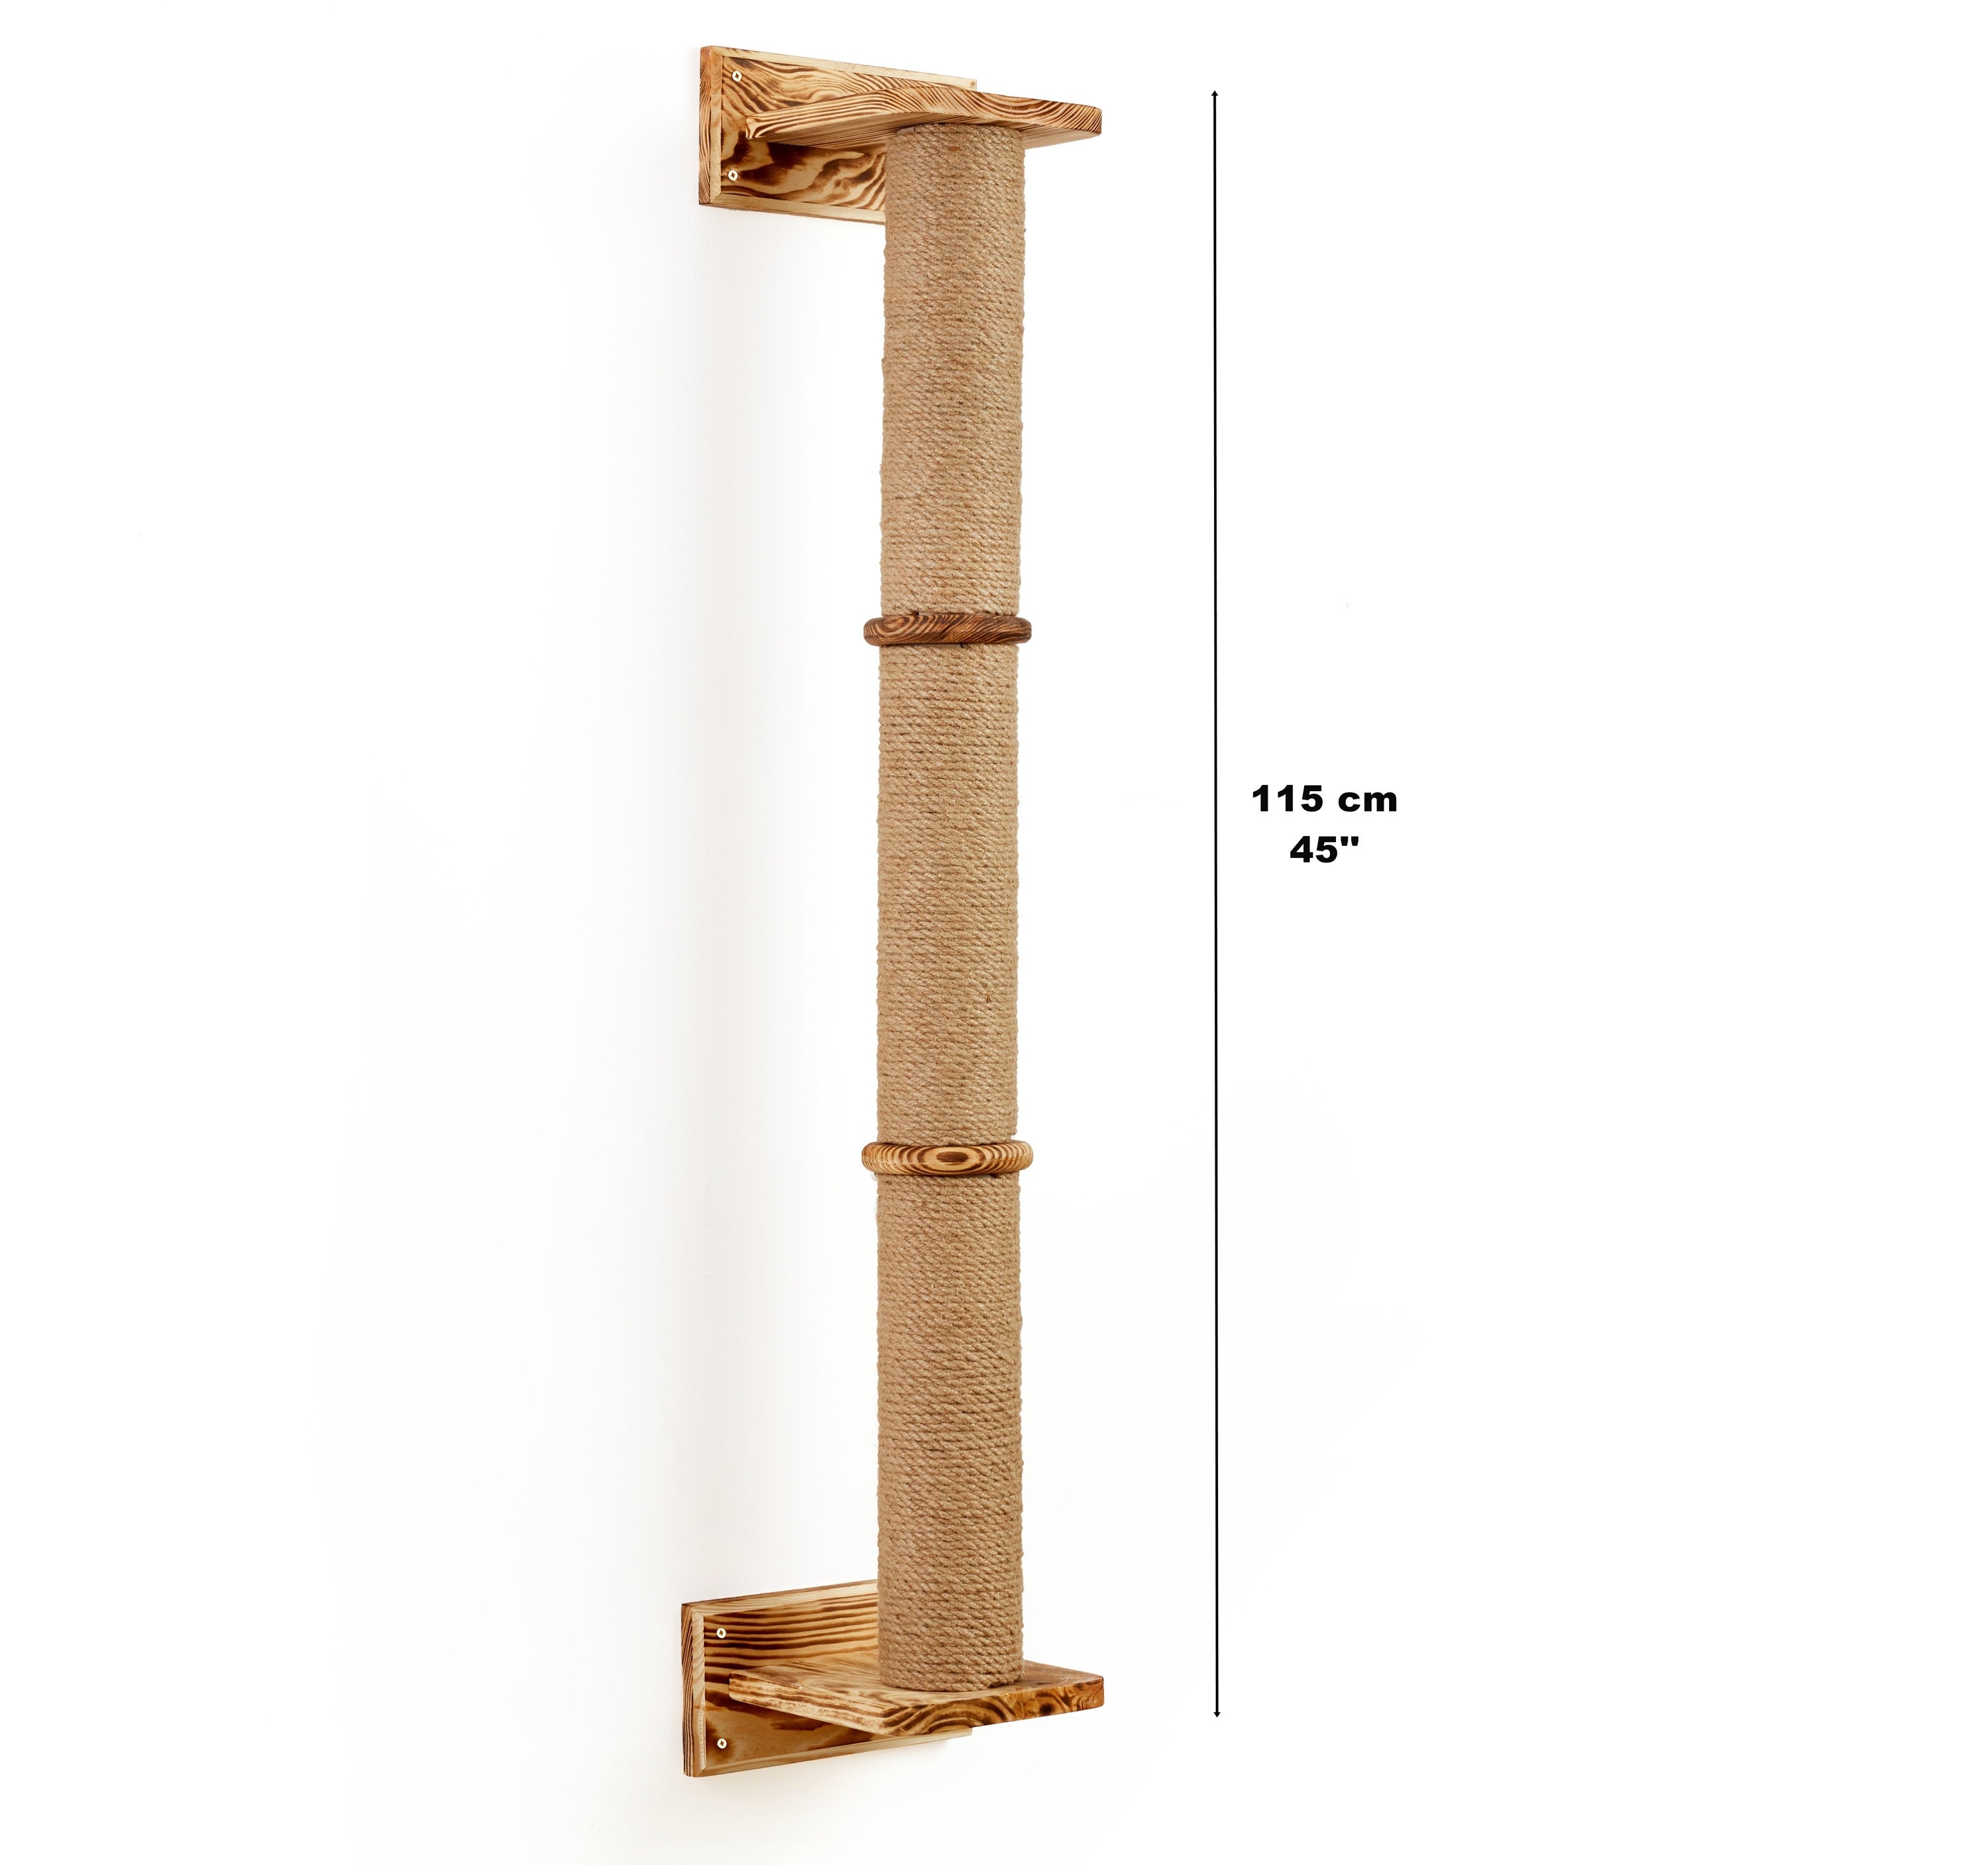 Large Wall Mounted Cat Sisal Pole - Wooden 3-tier Cat Sisal Climbing Pole - Perfect Addition For Cat Shelves And Other Cat Indoor Furniture